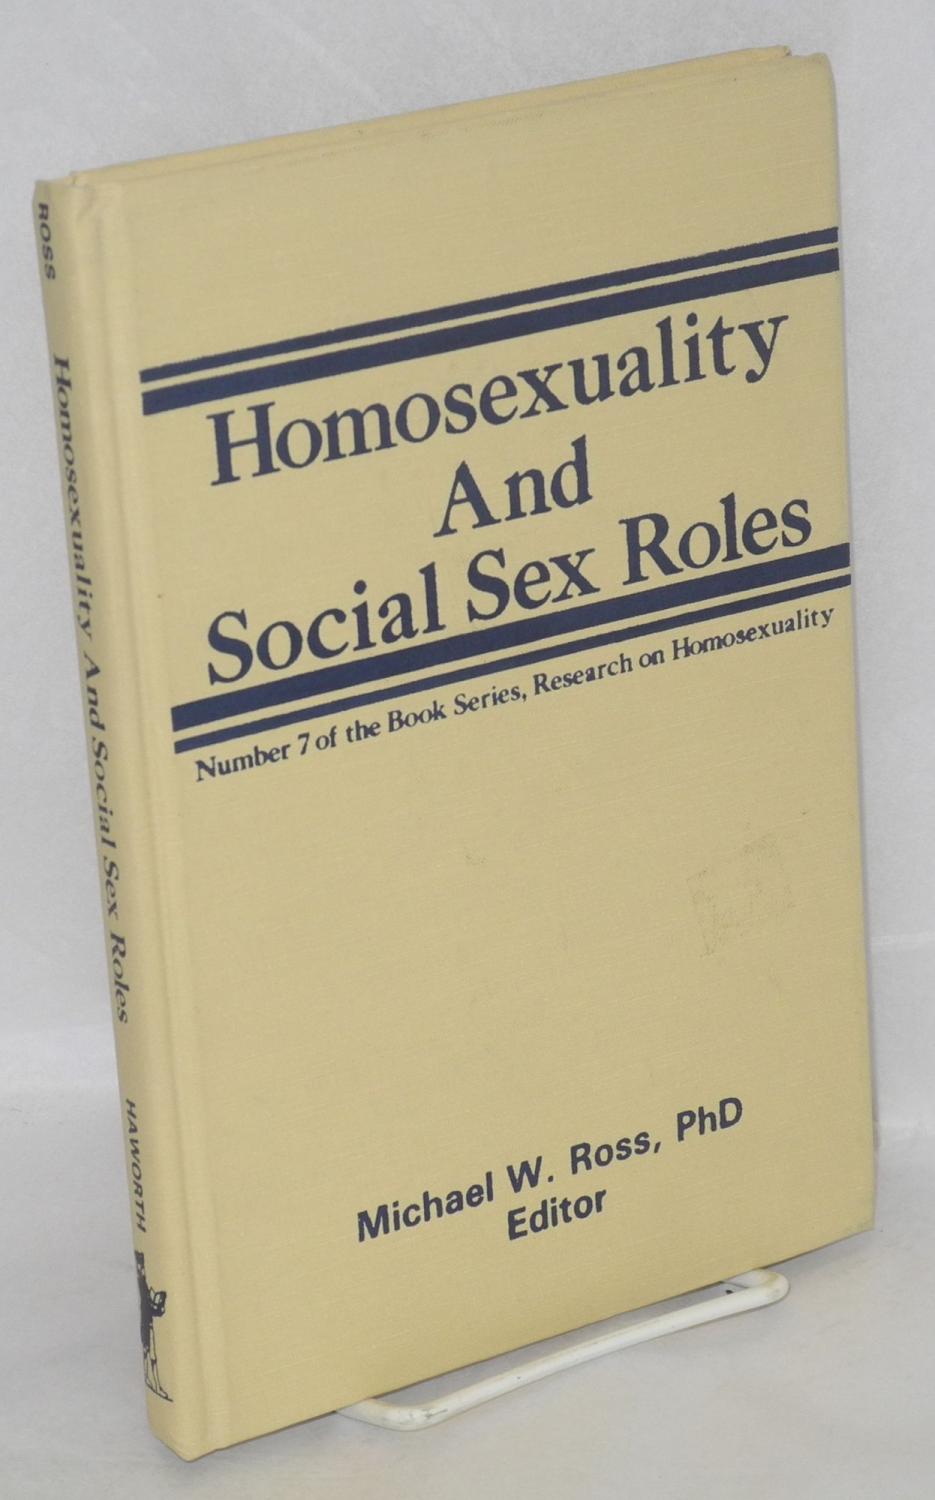 Homosexuality and Social Sex Roles